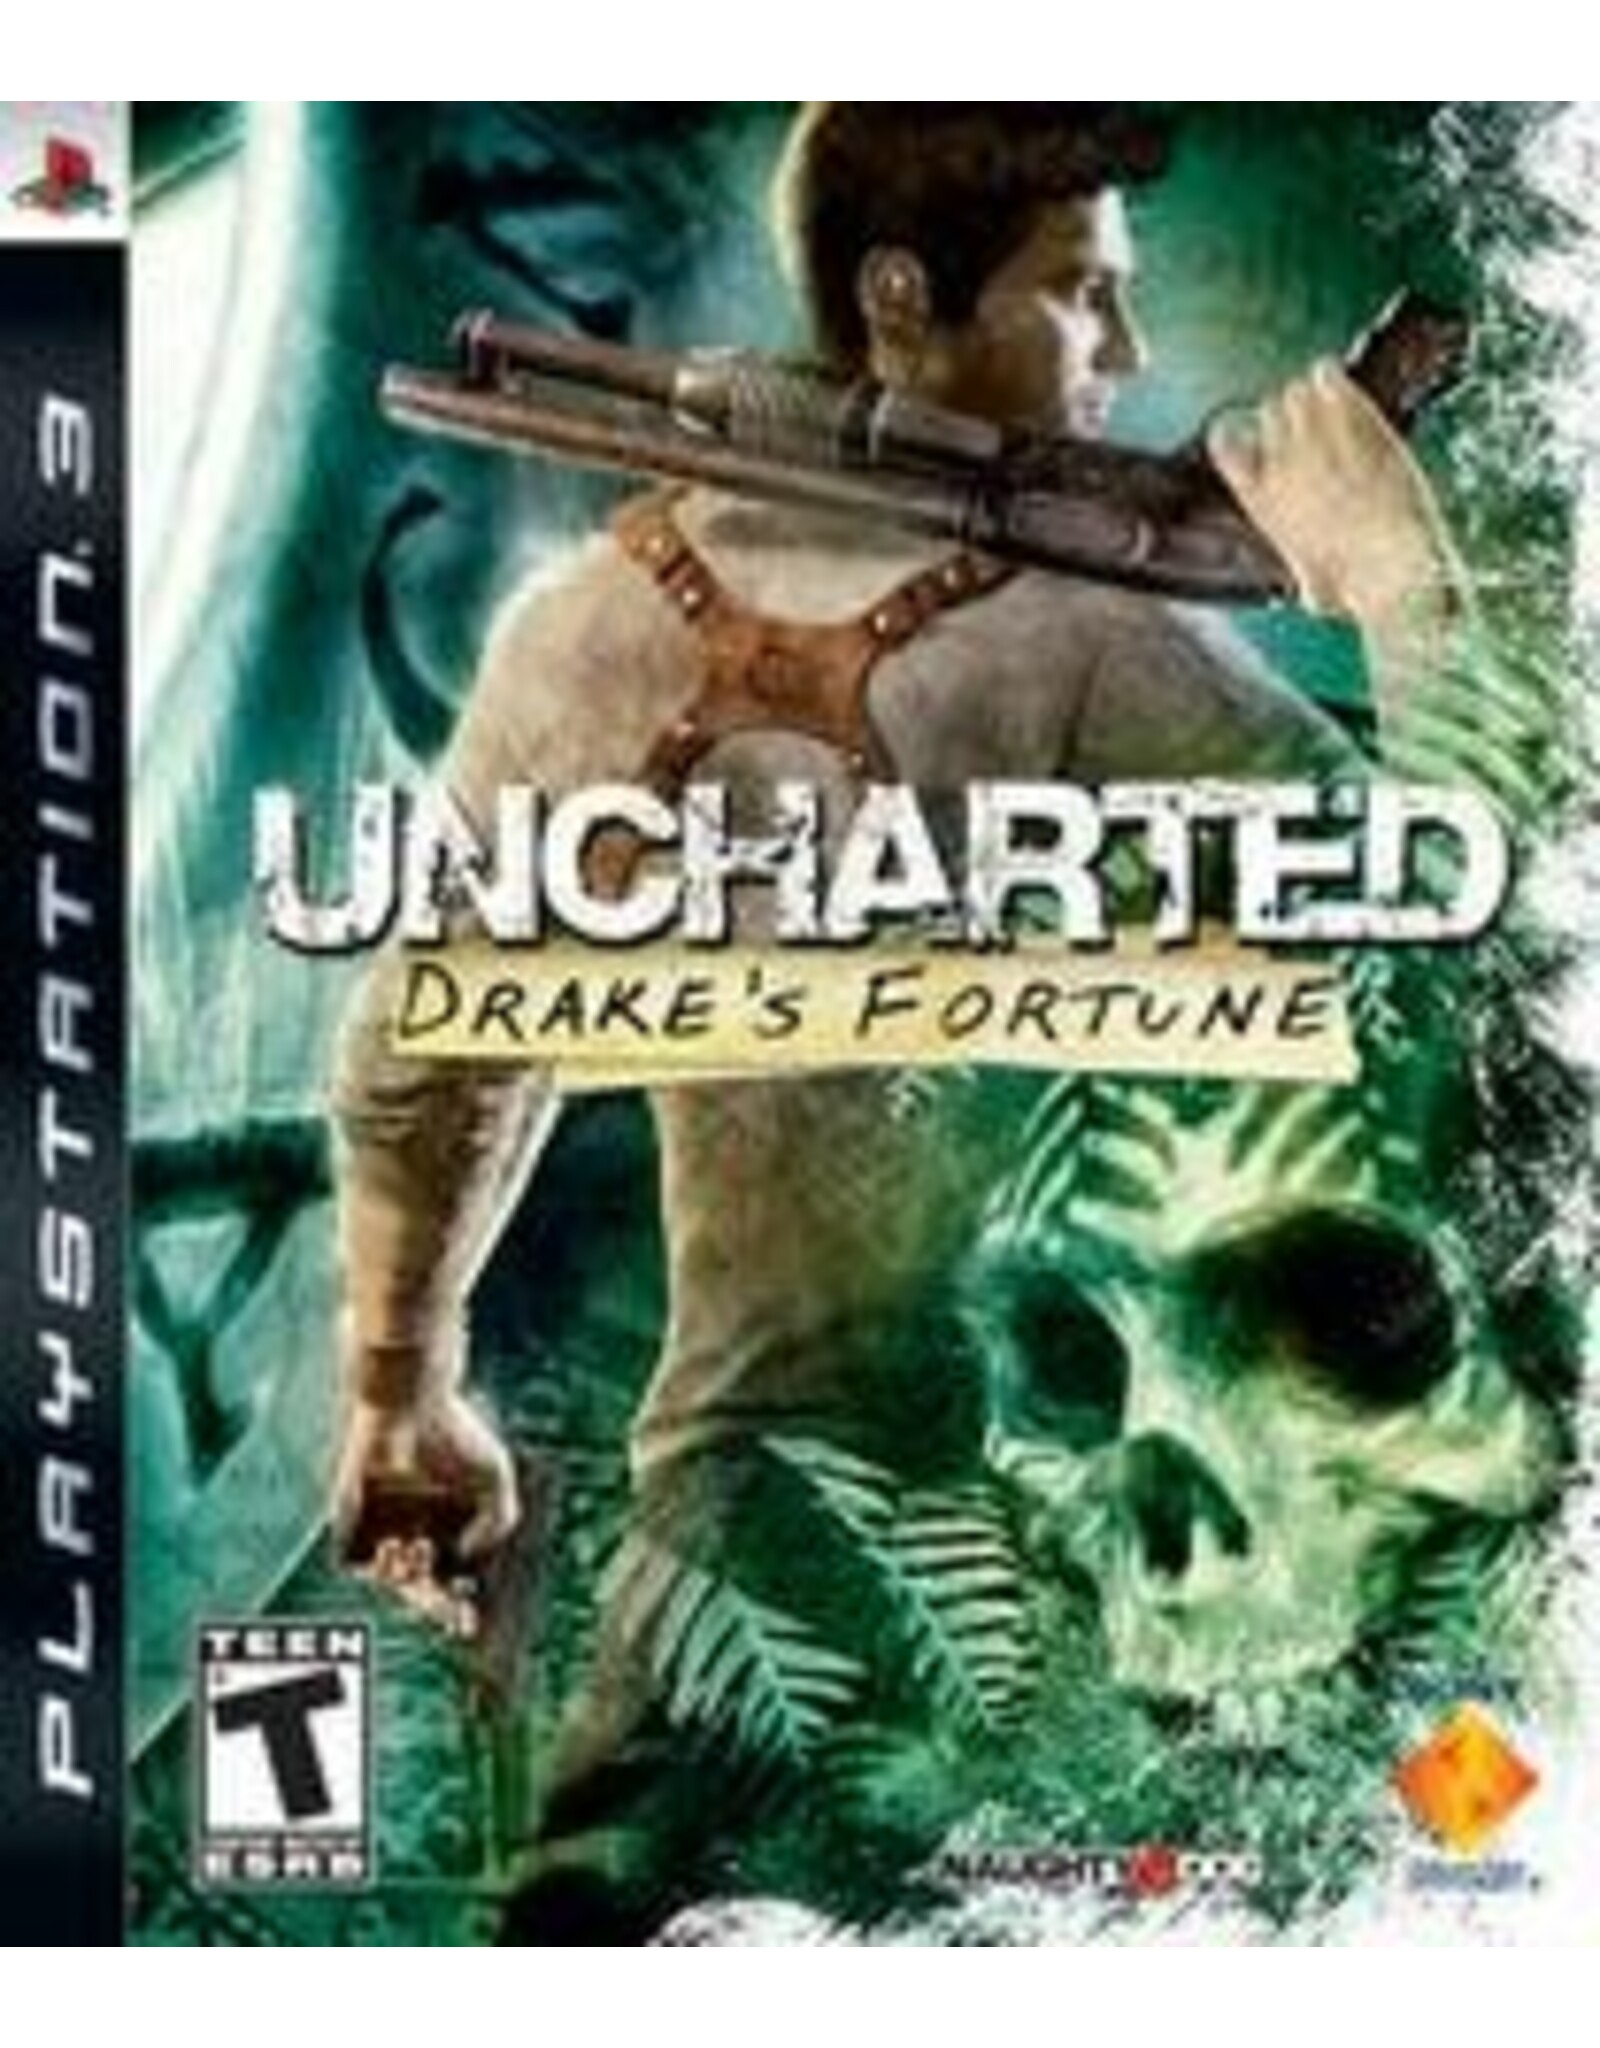 Playstation 3 Uncharted Drake's Fortune (CiB)